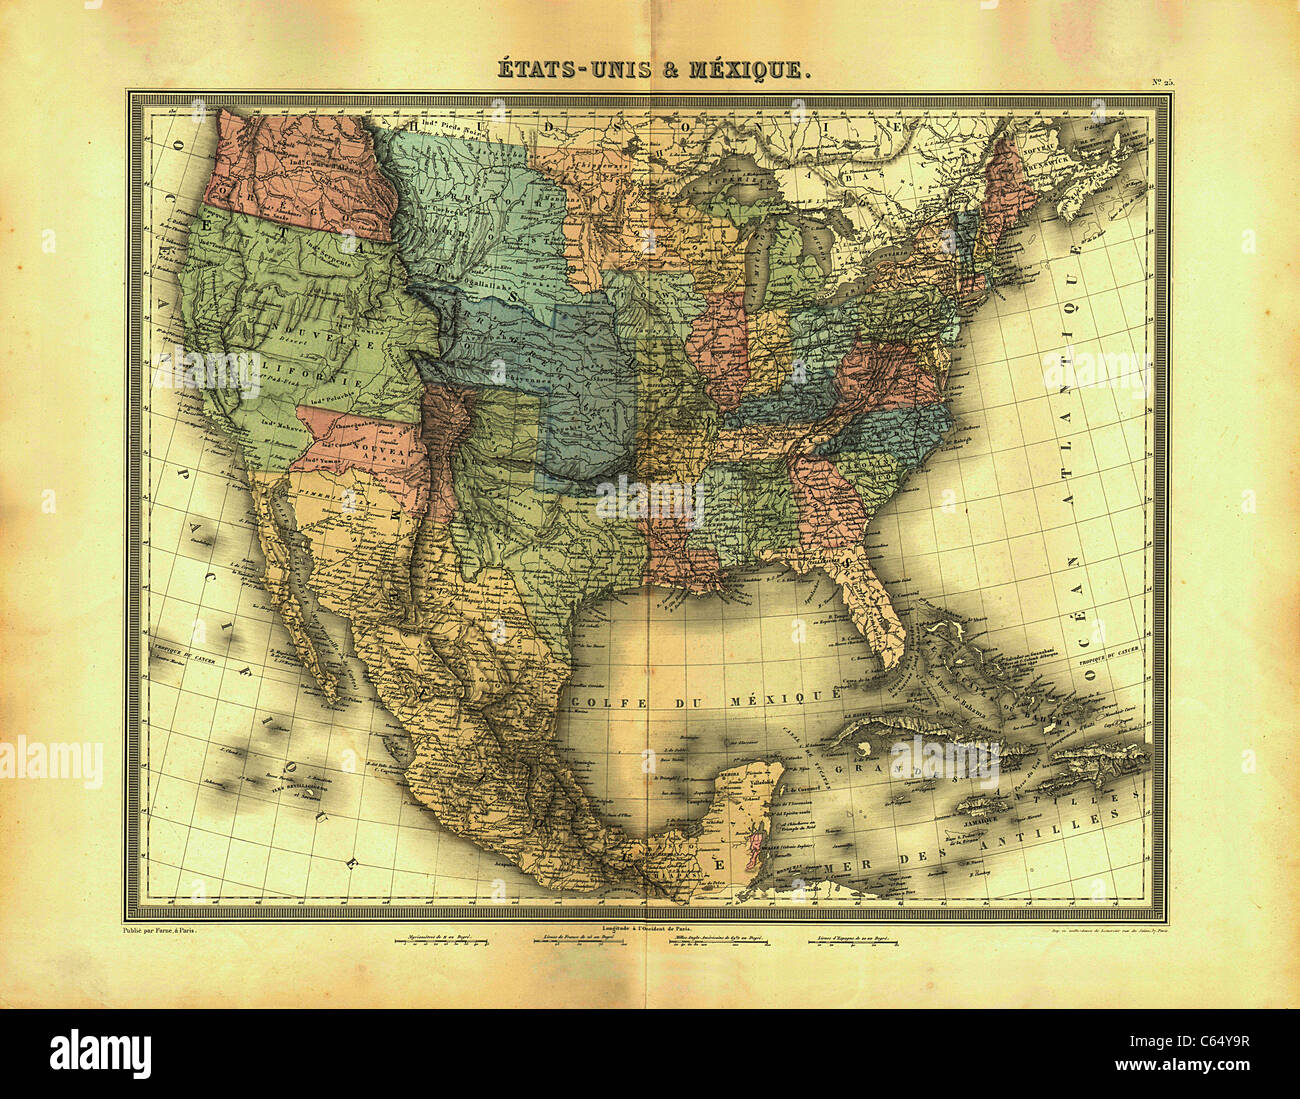 Antiquarian Map Etats-Unis & Mexique - The United States and Mexico - 1848 Thunot Duvotenay Map Stock Photo